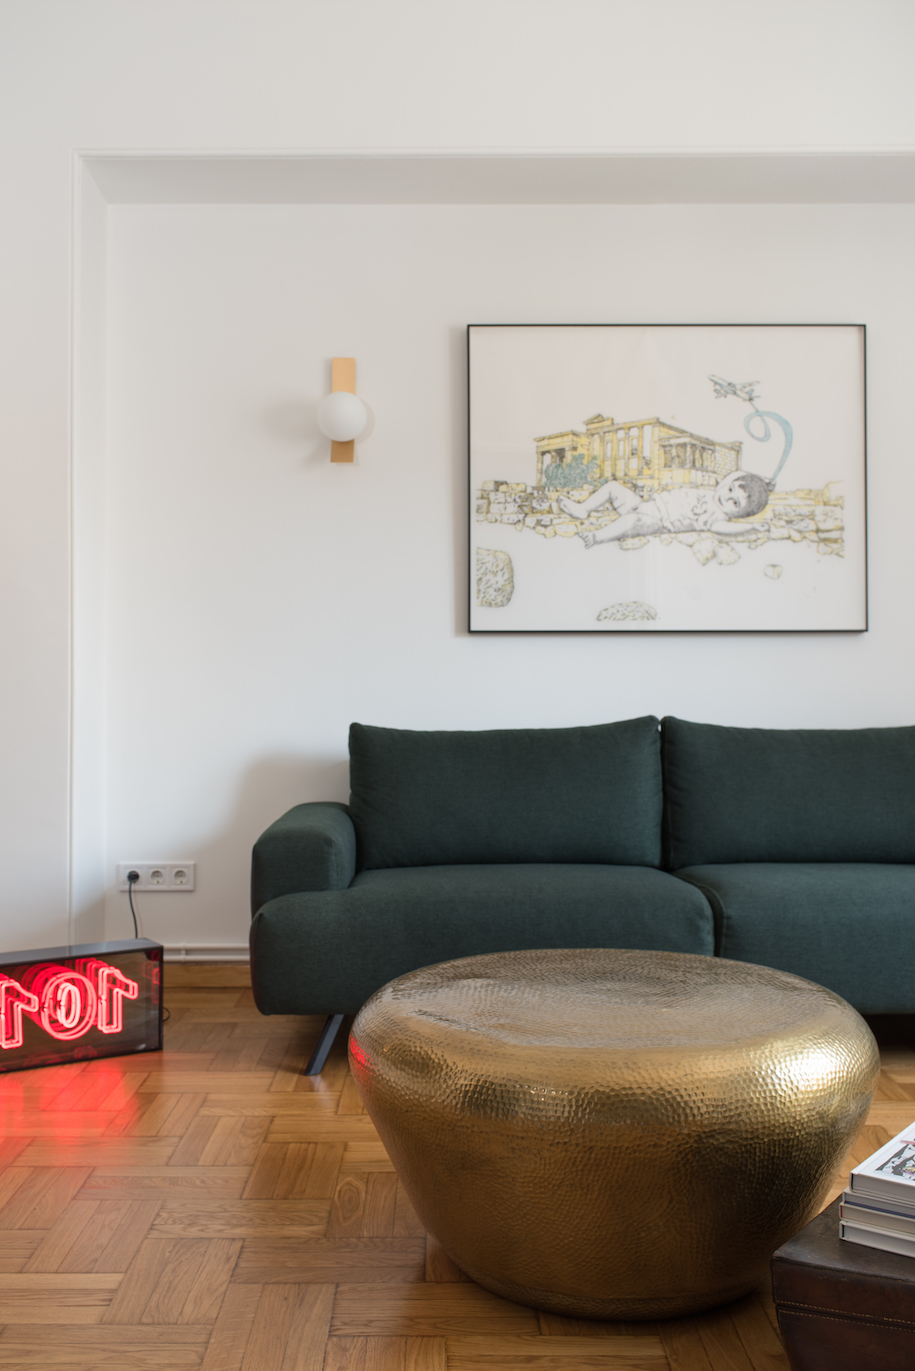 Archisearch Architect Kostis Chatzigiannis designed the interior of an Athenian Apartment full of art